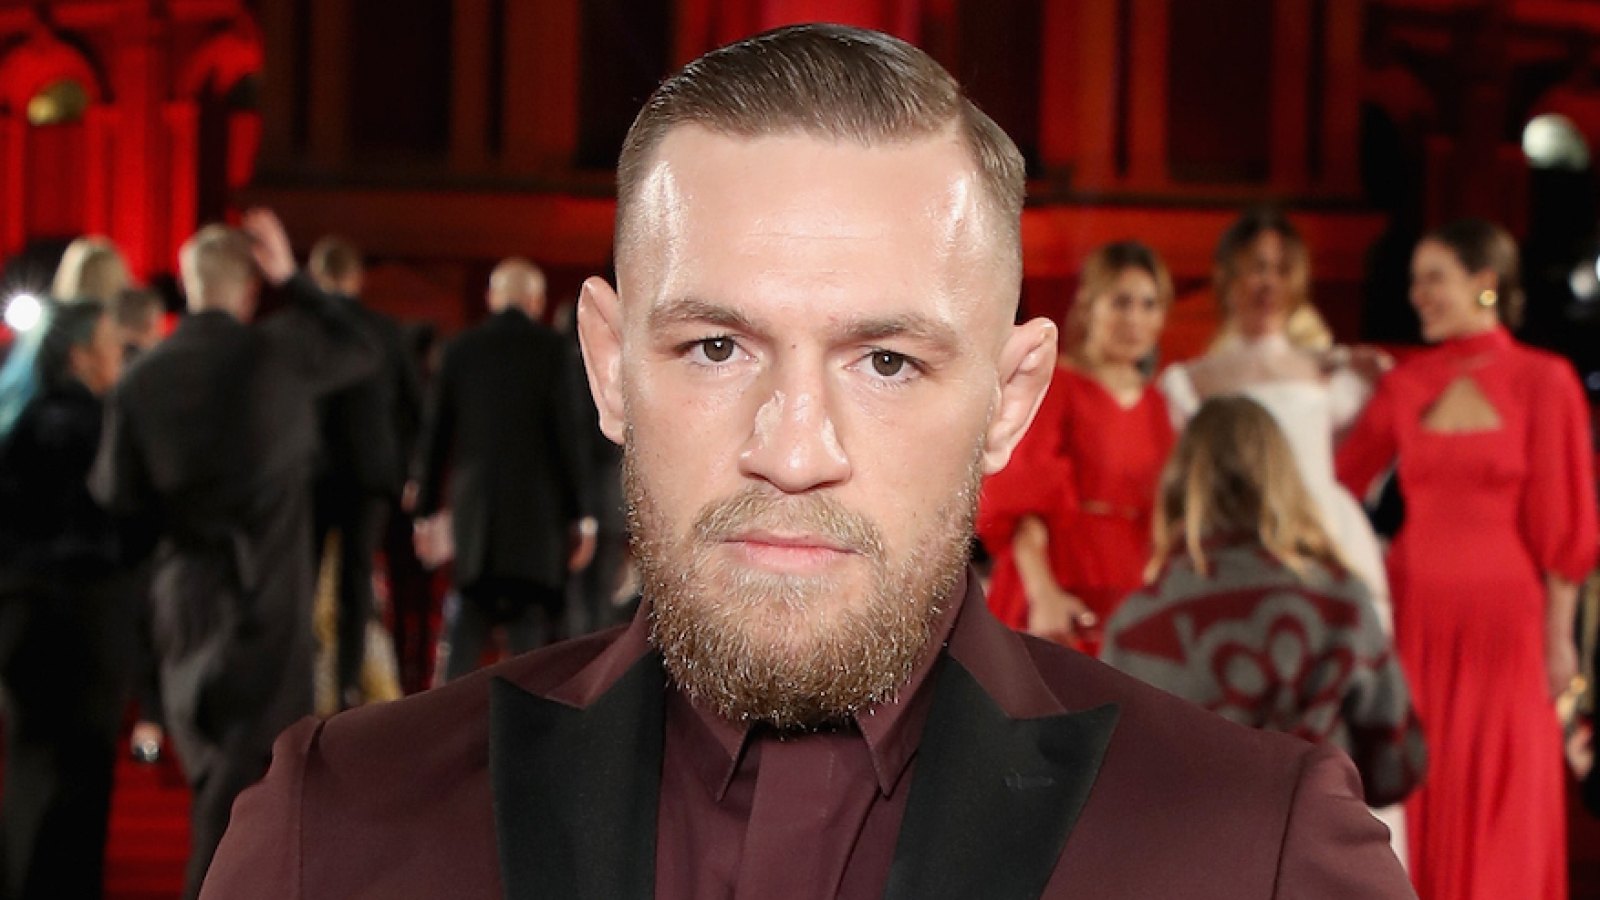 MMA Star Conor McGregor Arrested After Allegedly Smashing Fan's Phone